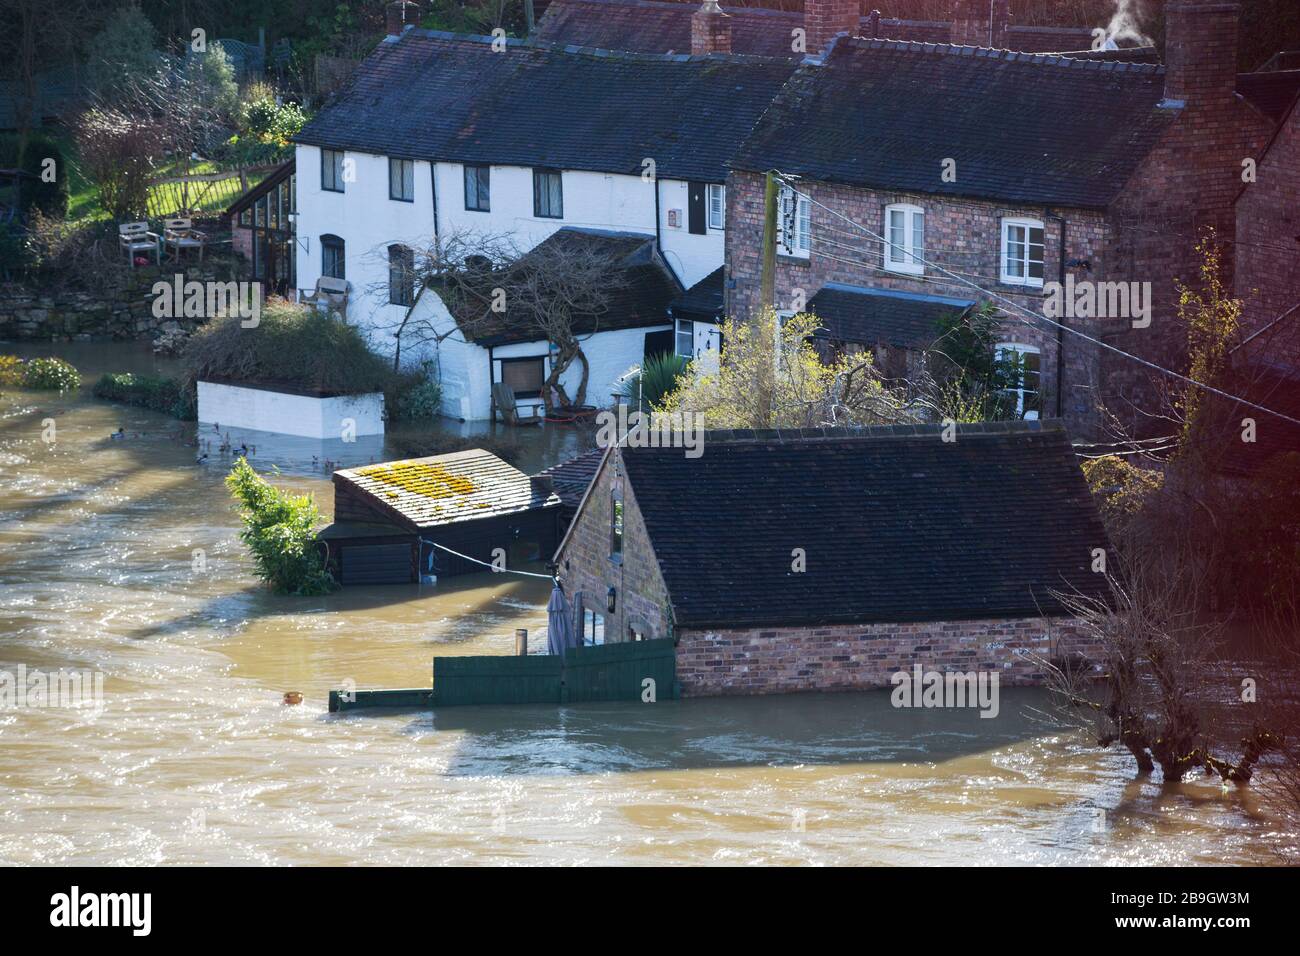 Flooded houses in Ironbridge in Shropshire, where the River Severn was in severe flood conditions after the wettest February on record in the UK, Febr Stock Photo